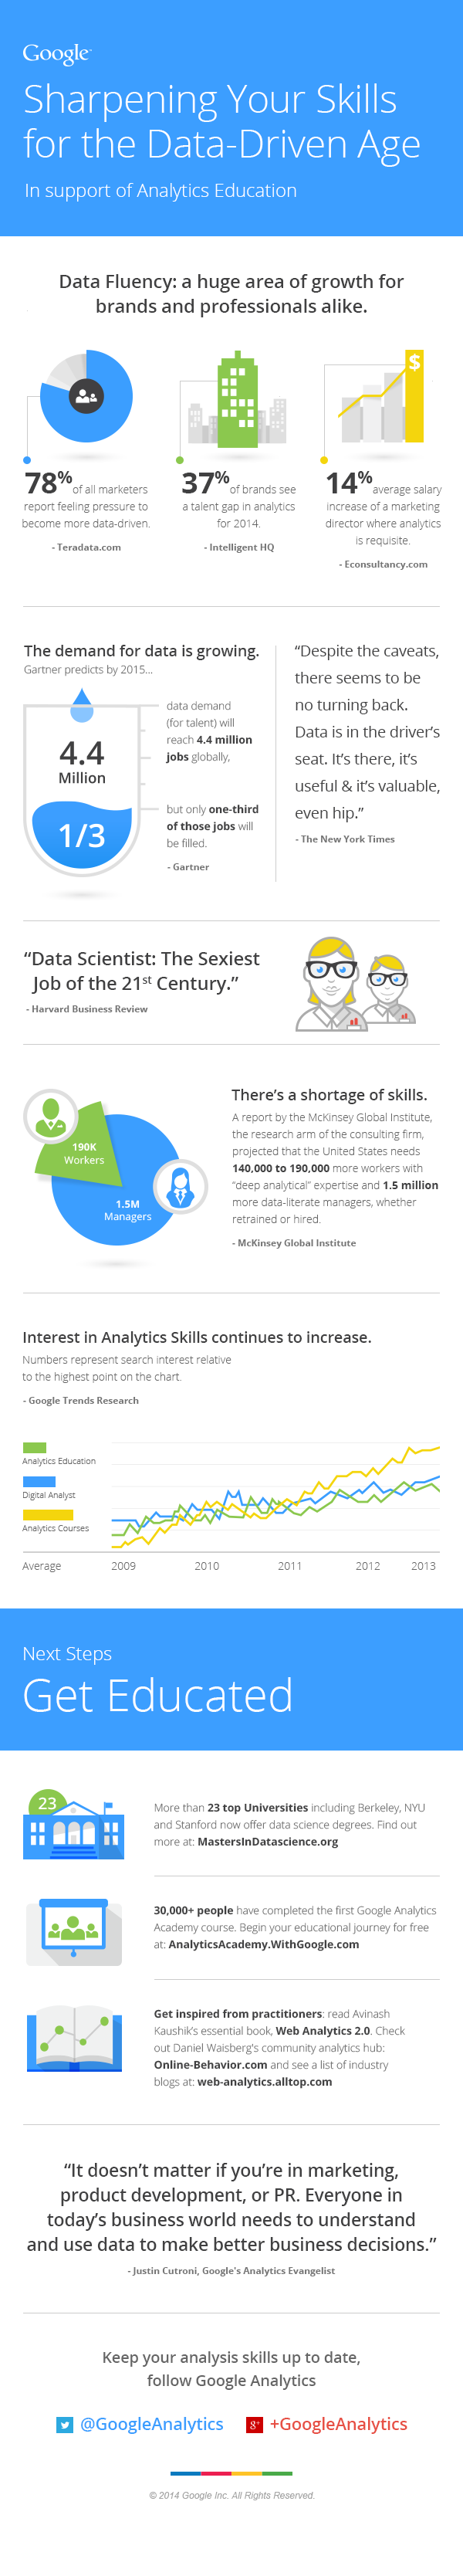 Infographic by Google: Importance of Analytics Education